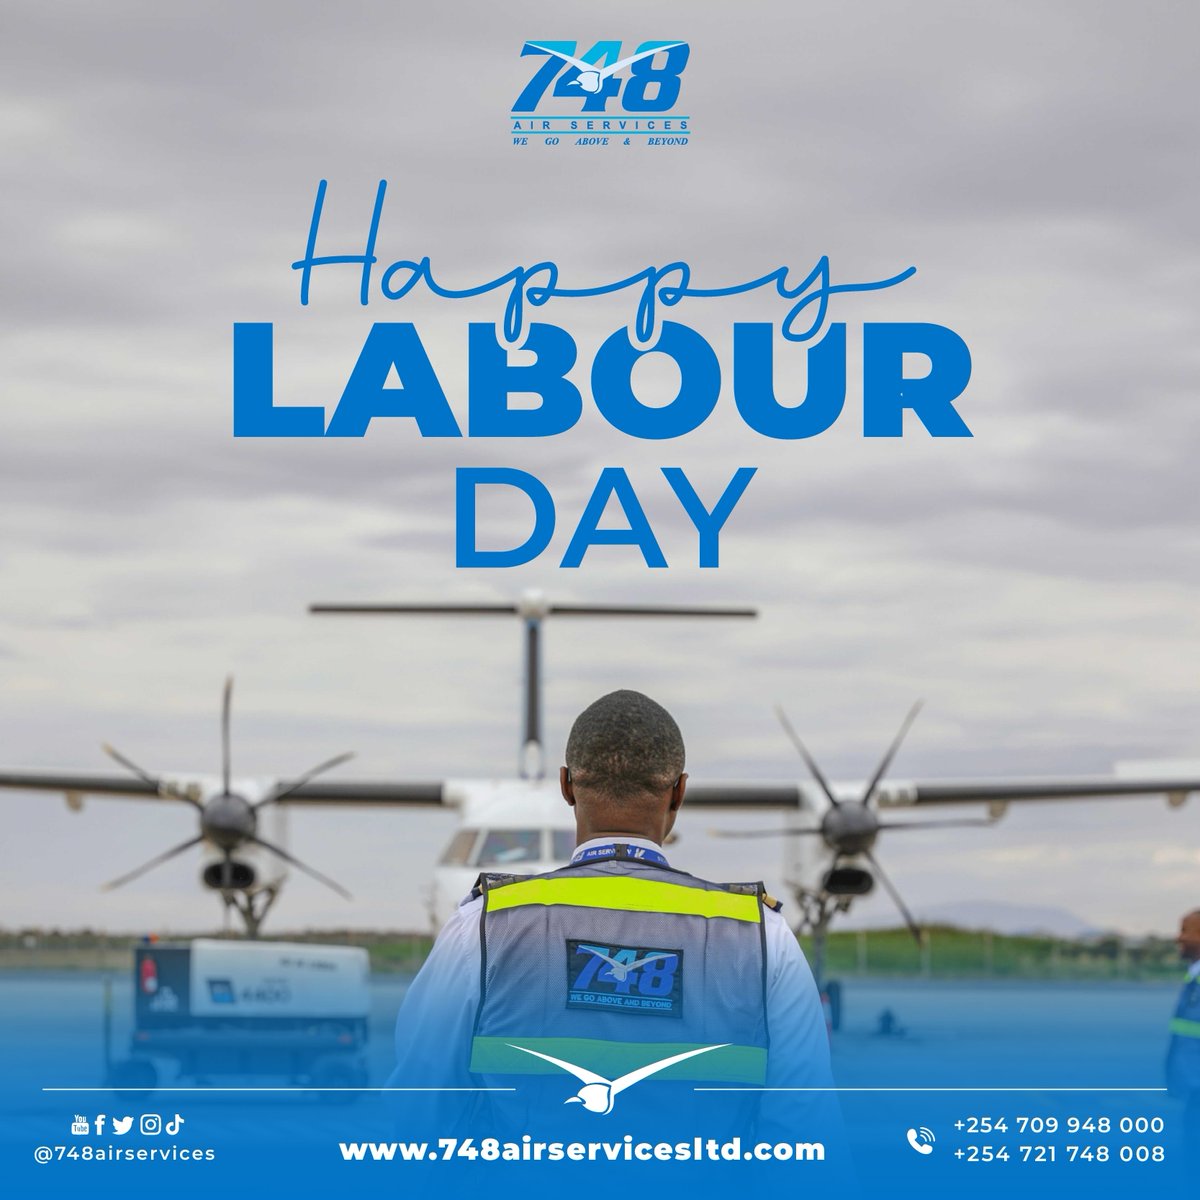 Happy Labour Day! Let's celebrate the hard work and contributions of all workers around the world!